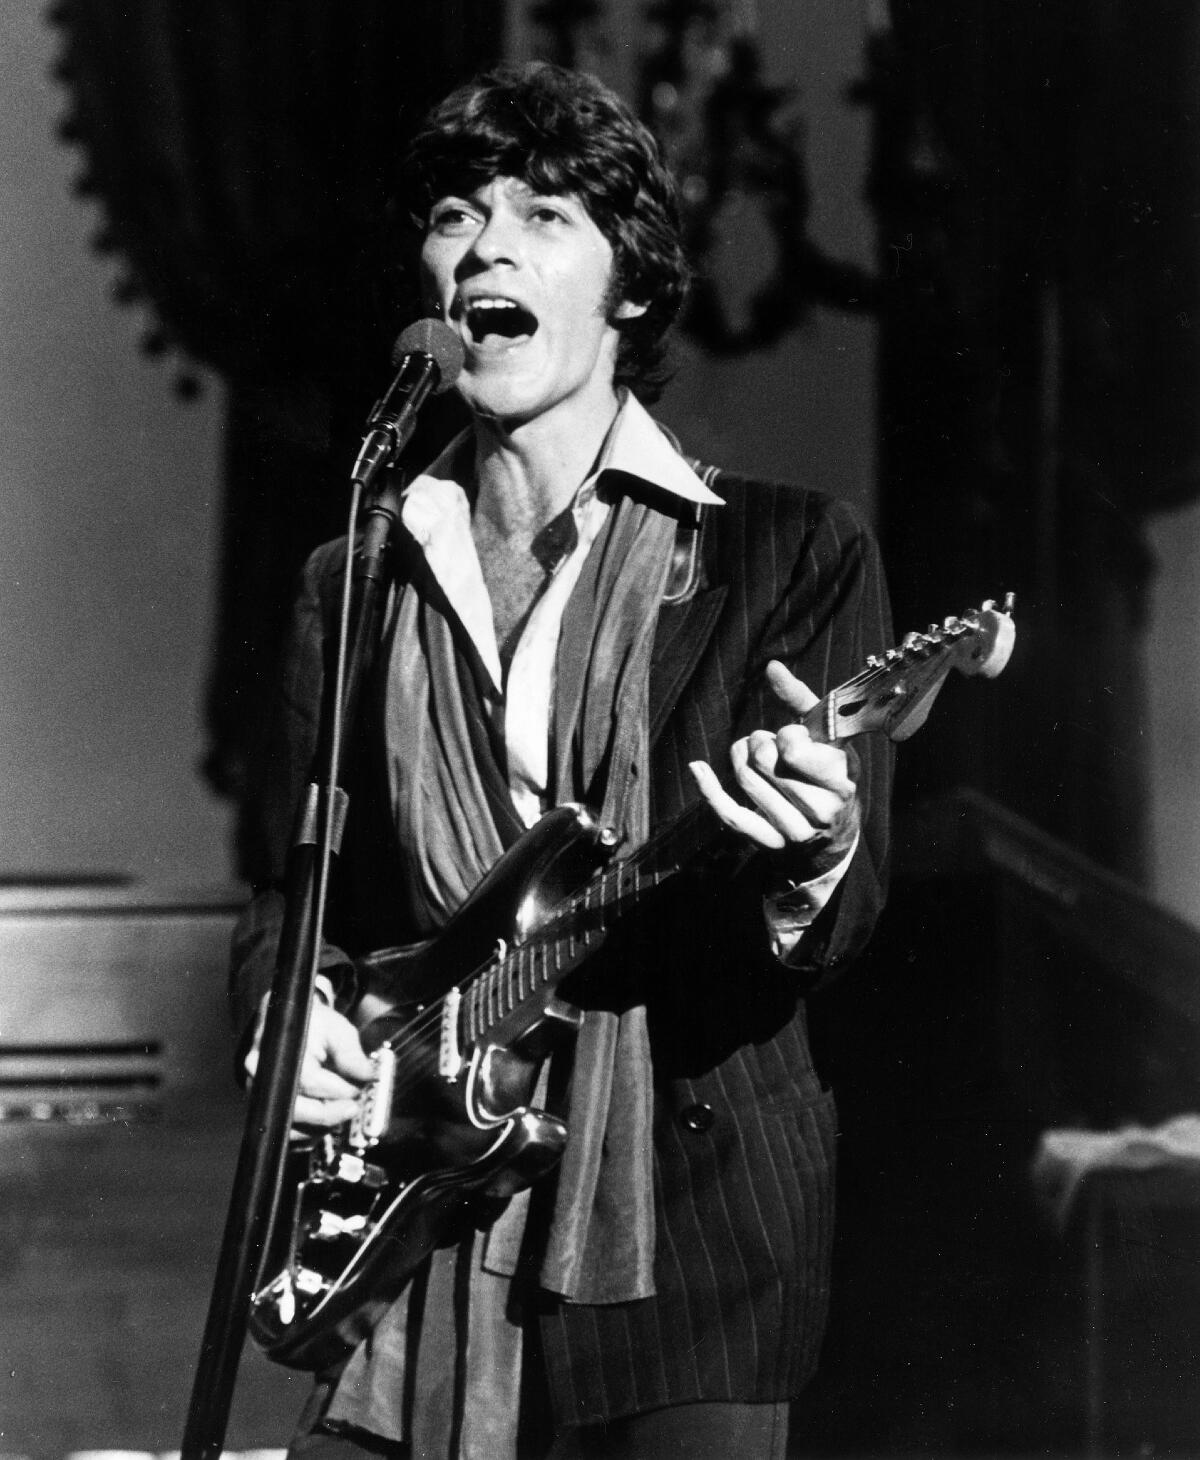 Robbie Robertson performing in the 1978 concert film "The Last Waltz."